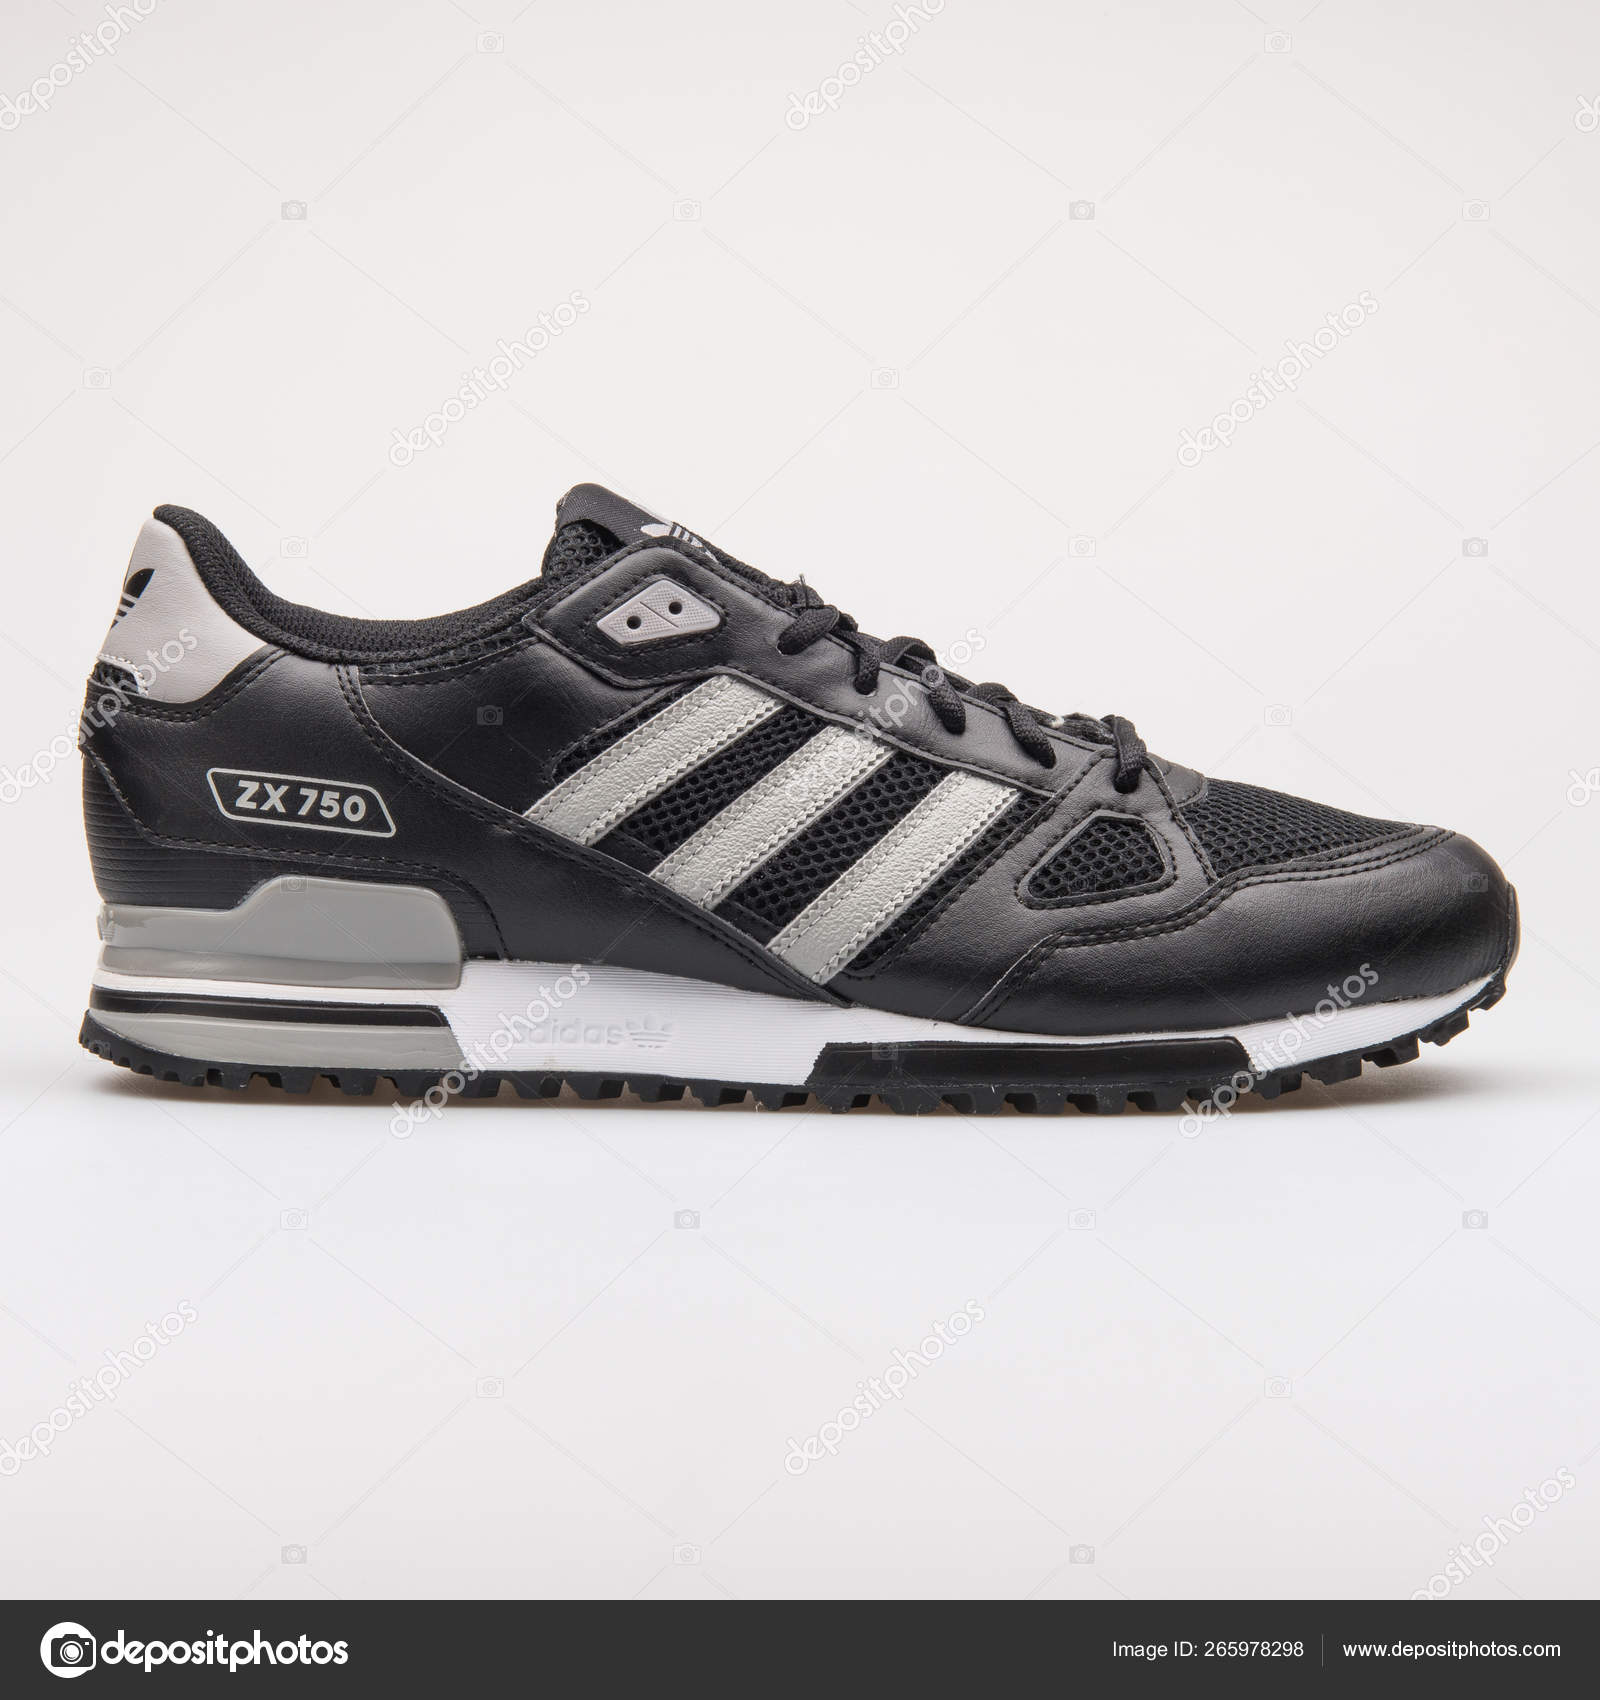 zx 750 black and white